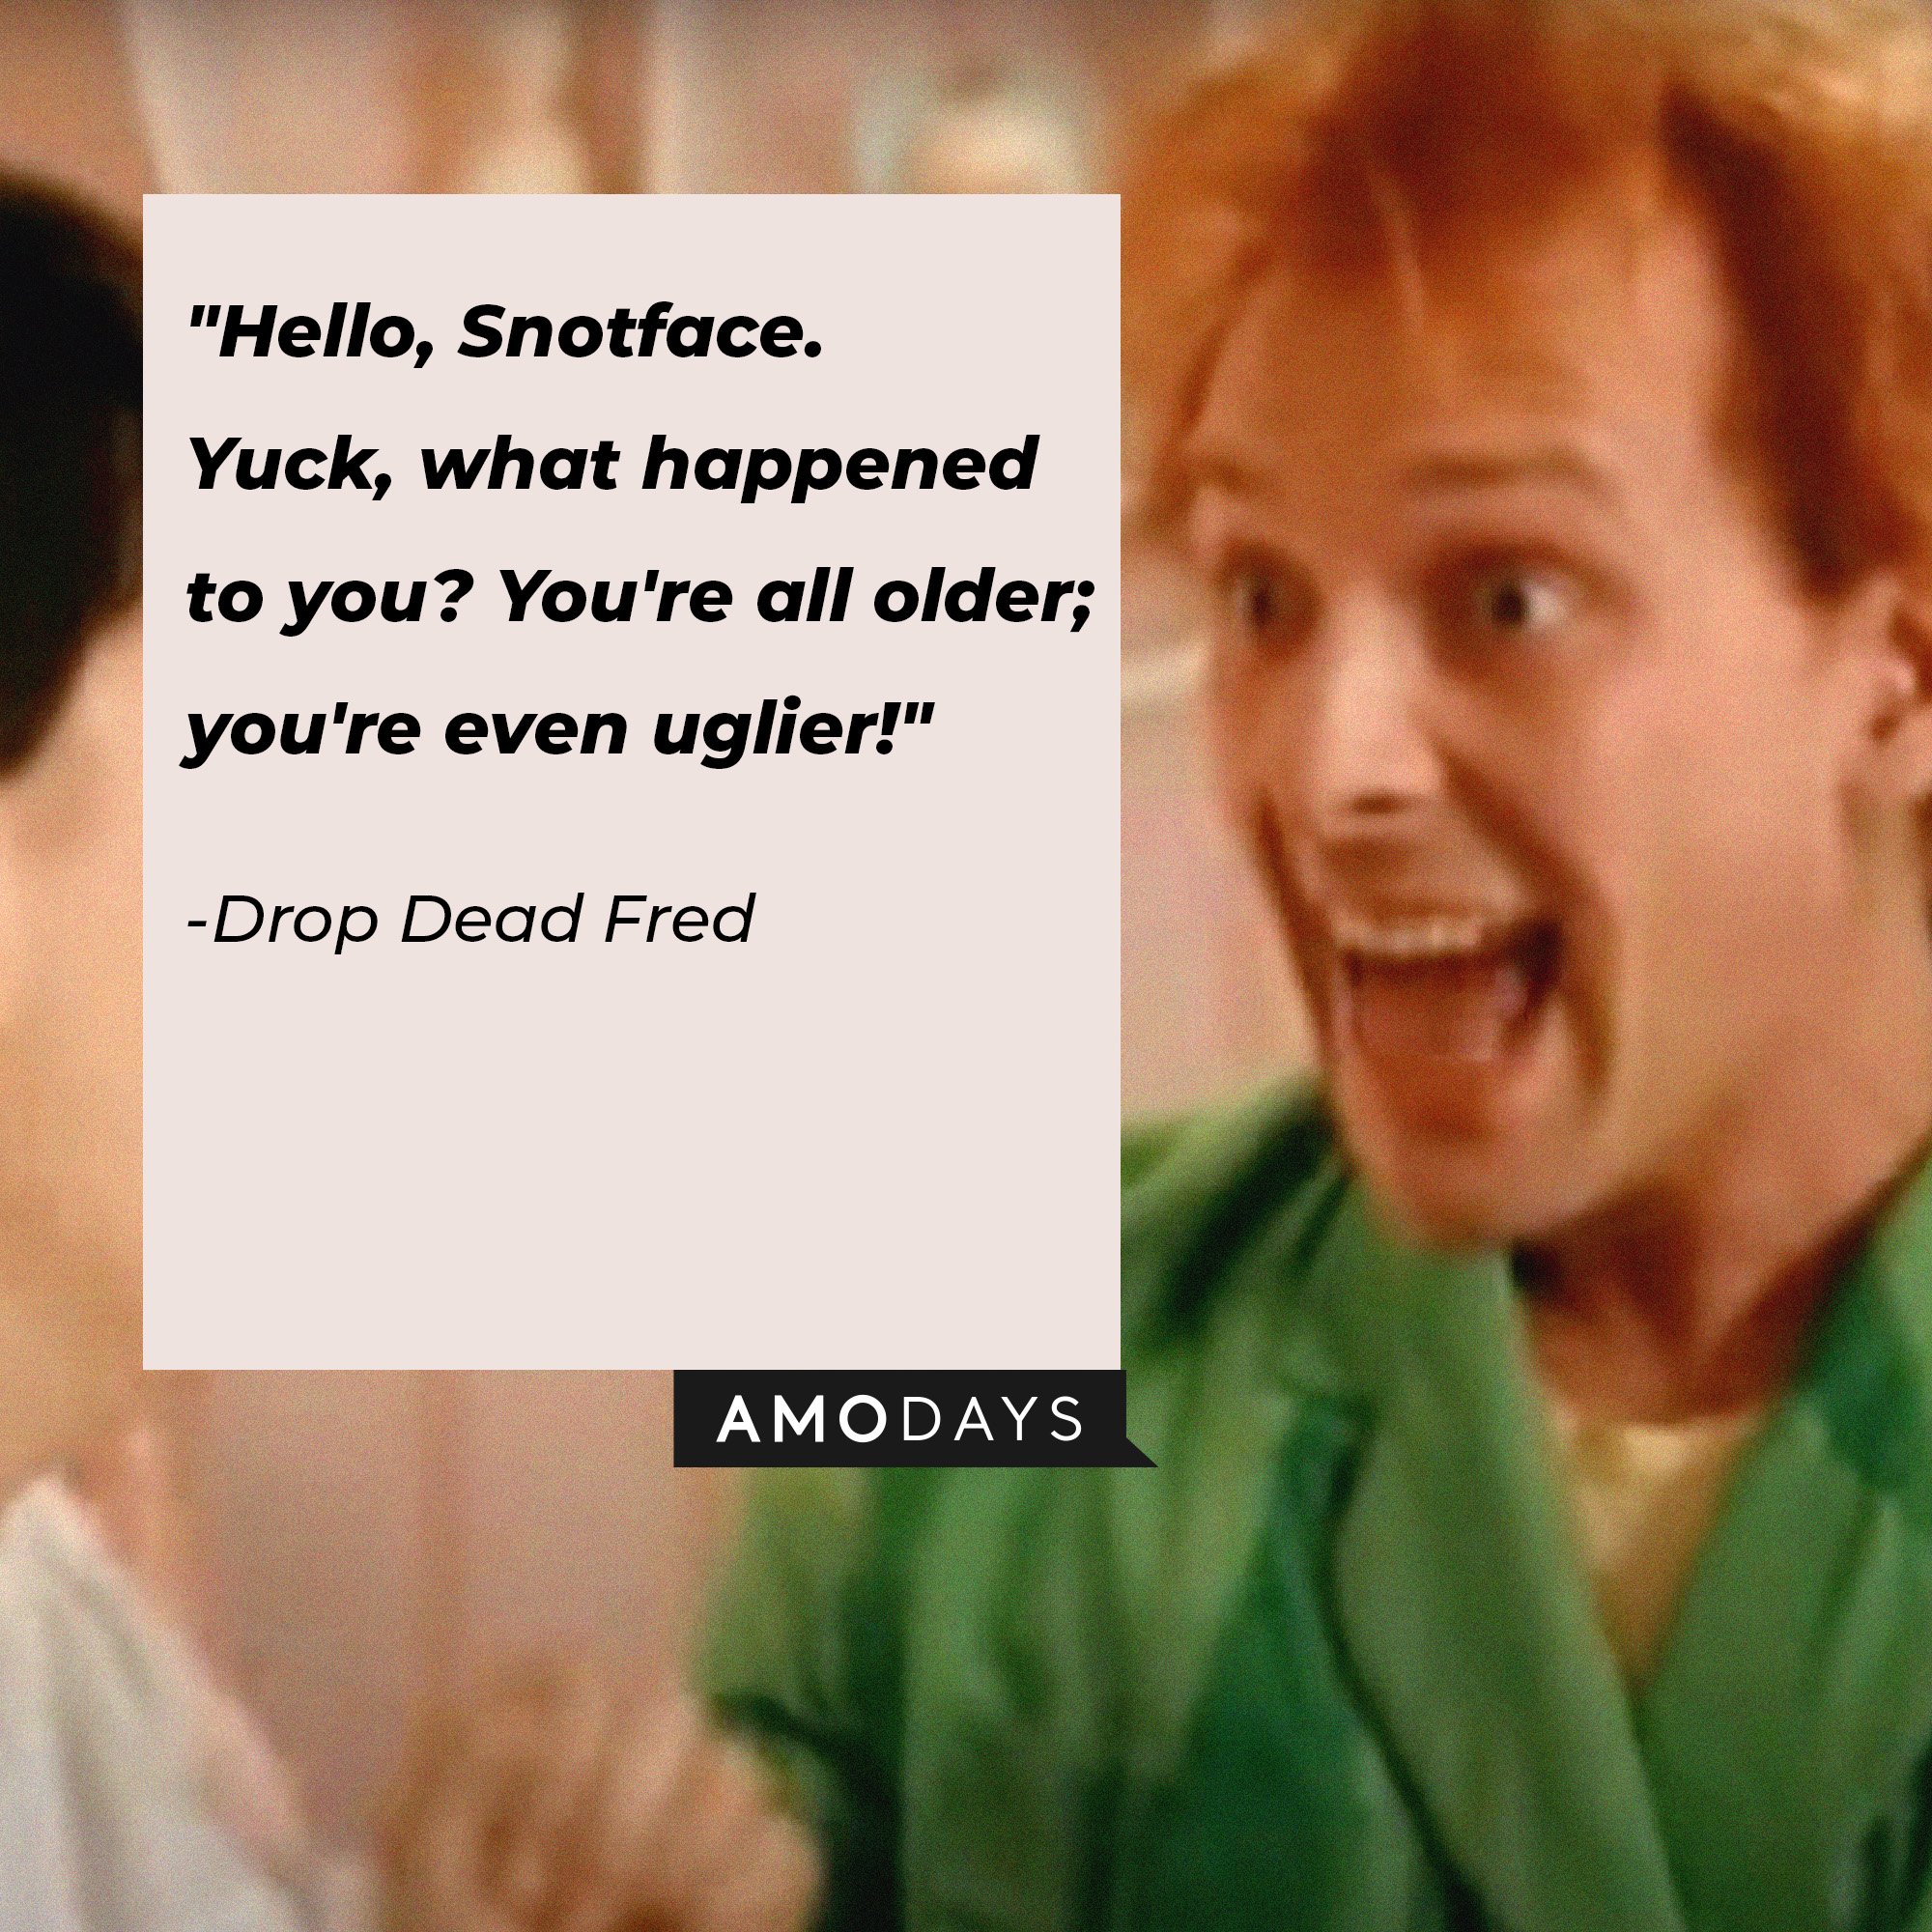 Drop Dead Fred's quote: "Hello, Snotface. Yuck, what happened to you? You're all older; you're even uglier!"  | Image: AmoDays